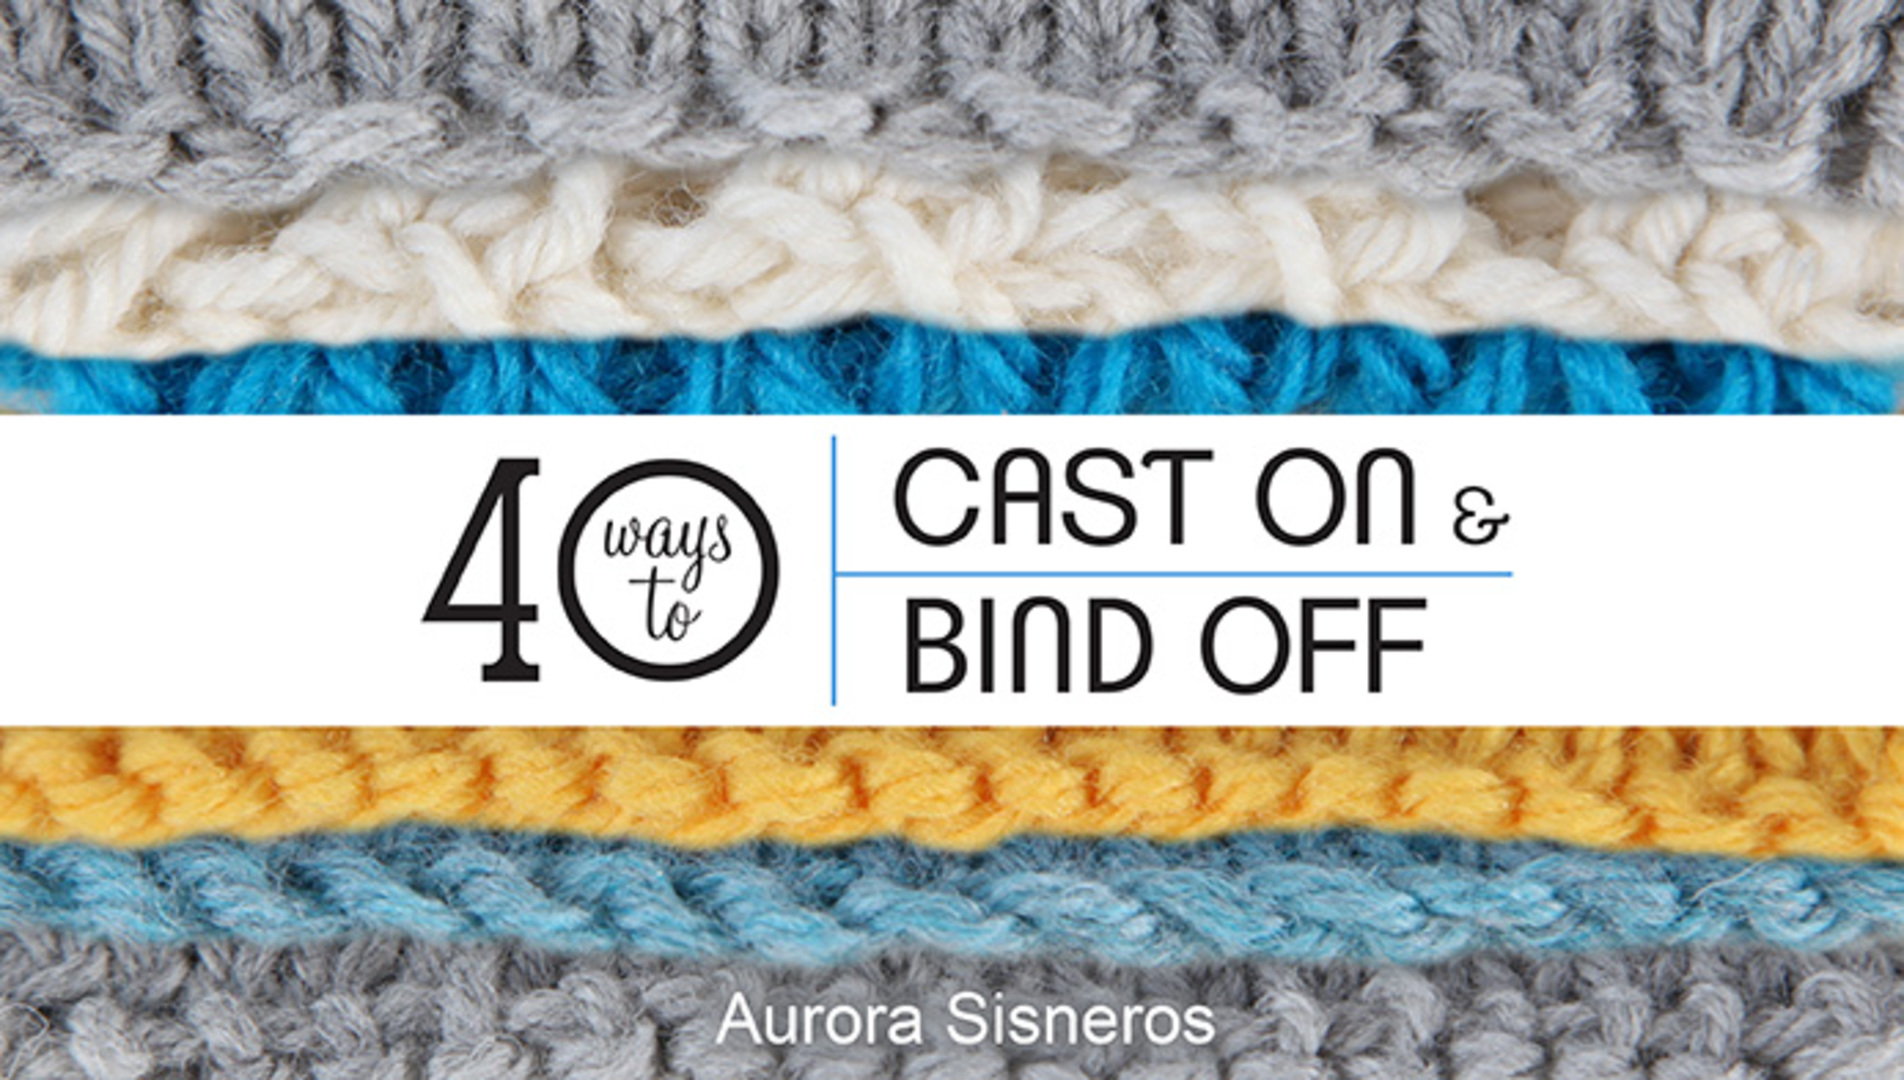 40 Ways to Cast on and Bind off Ad with knitting in the background